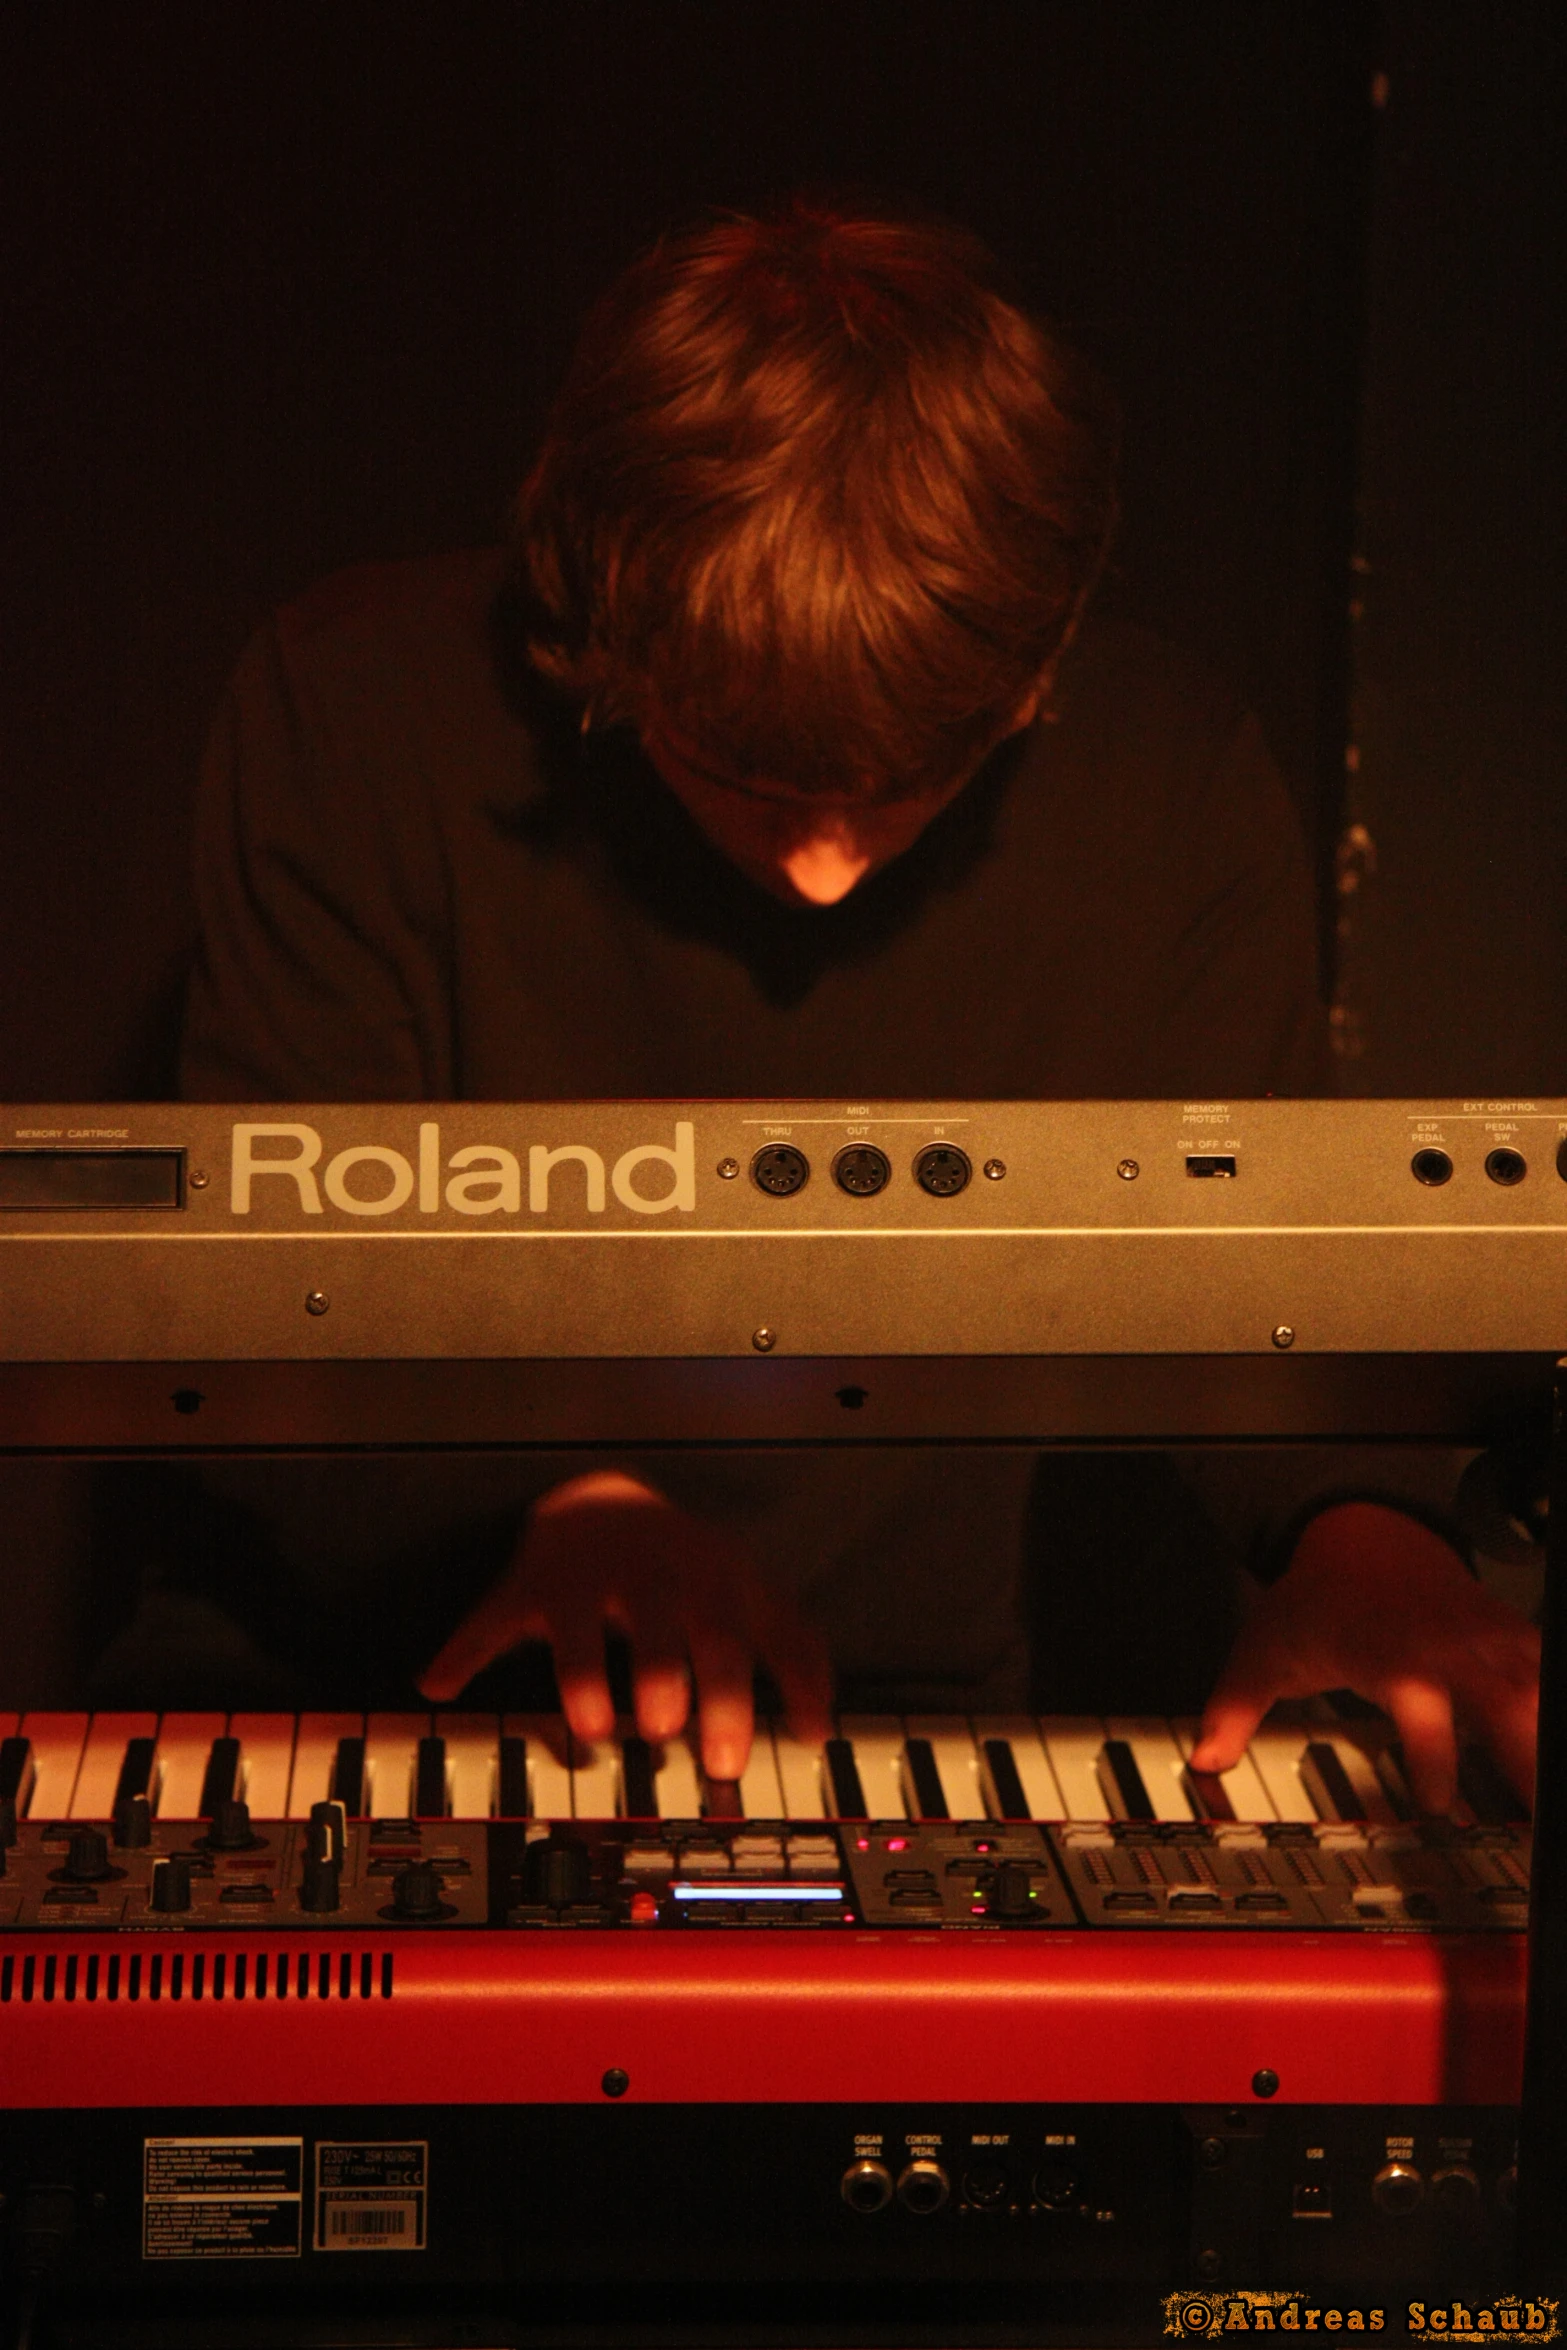 a young person plays an organ with a keyboard